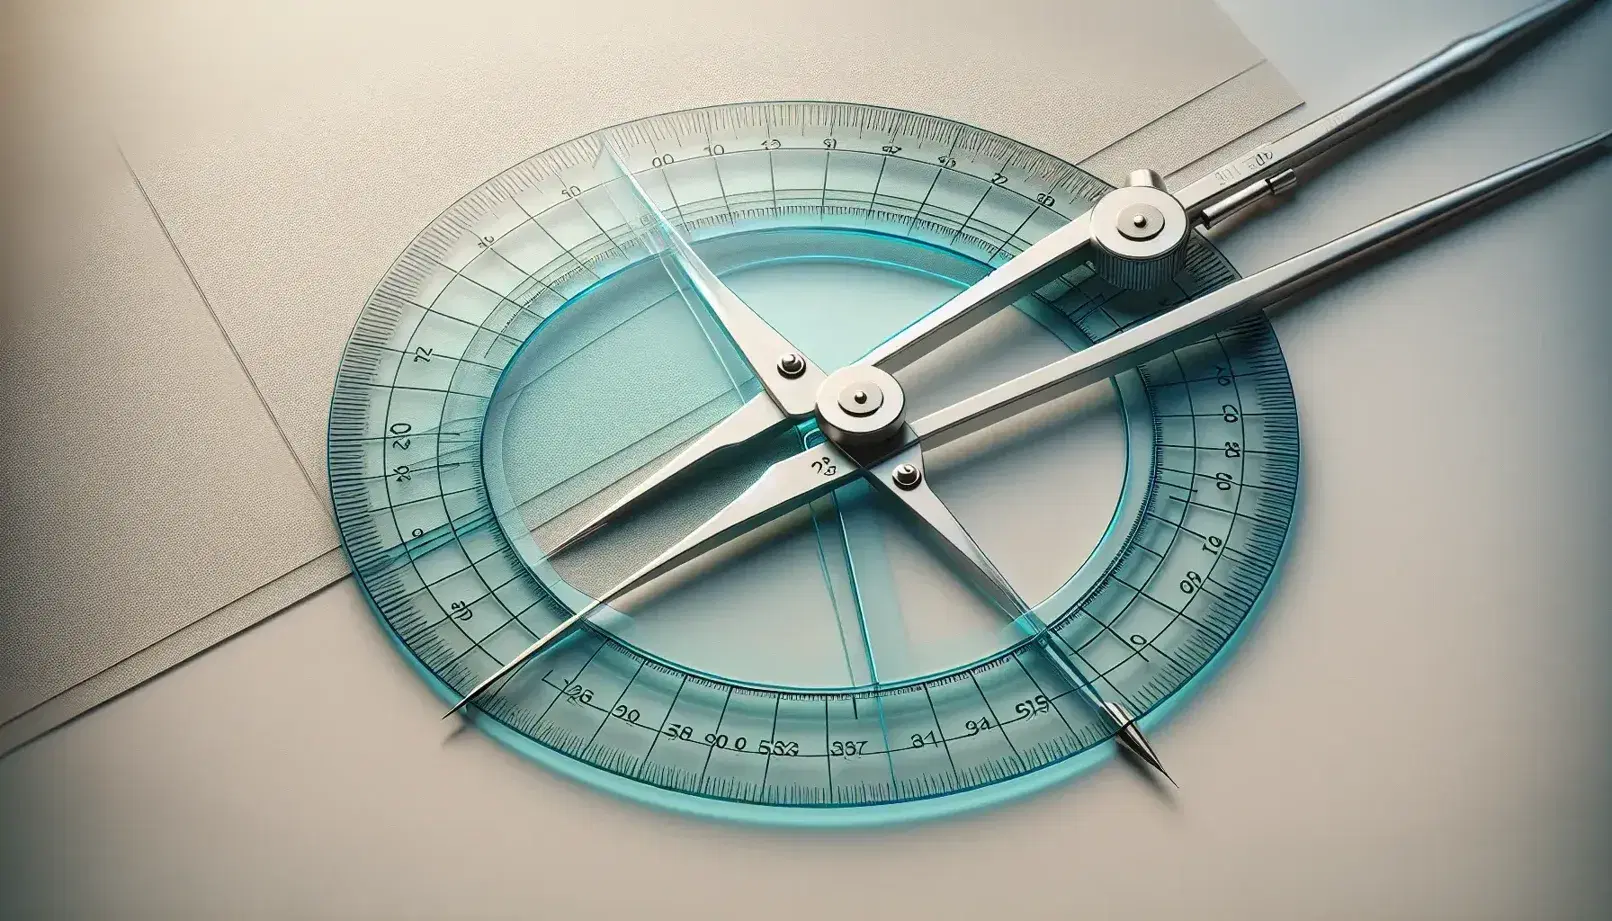 Transparent blue protractor with raised degree notches and compasses on top, alongside a folded green right triangle on a light background.